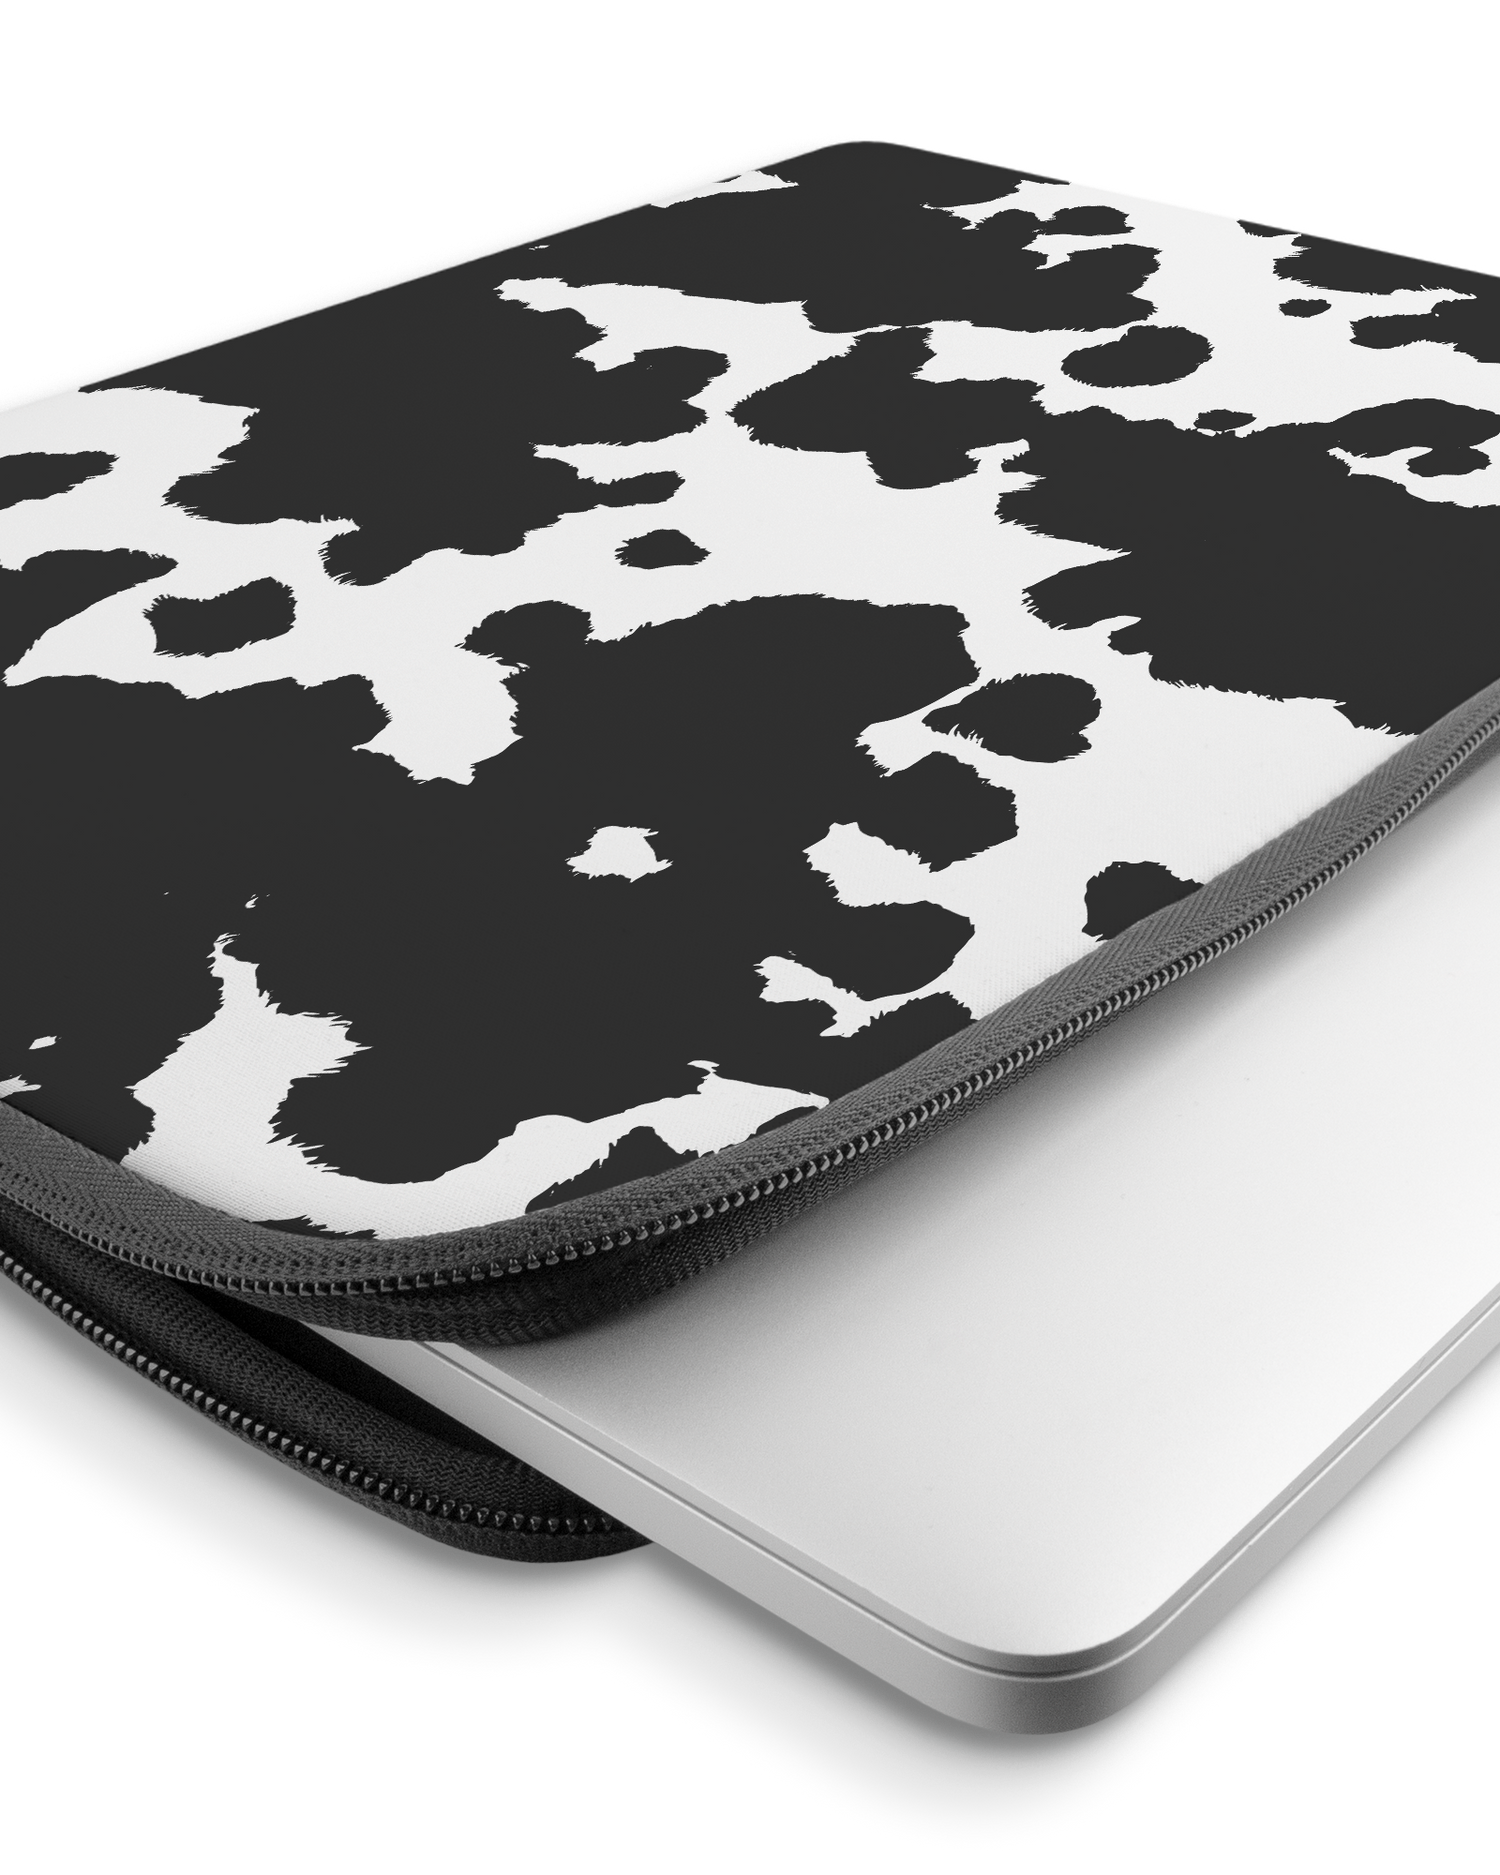 Cow Print Laptop Case 15-16 inch with device inside